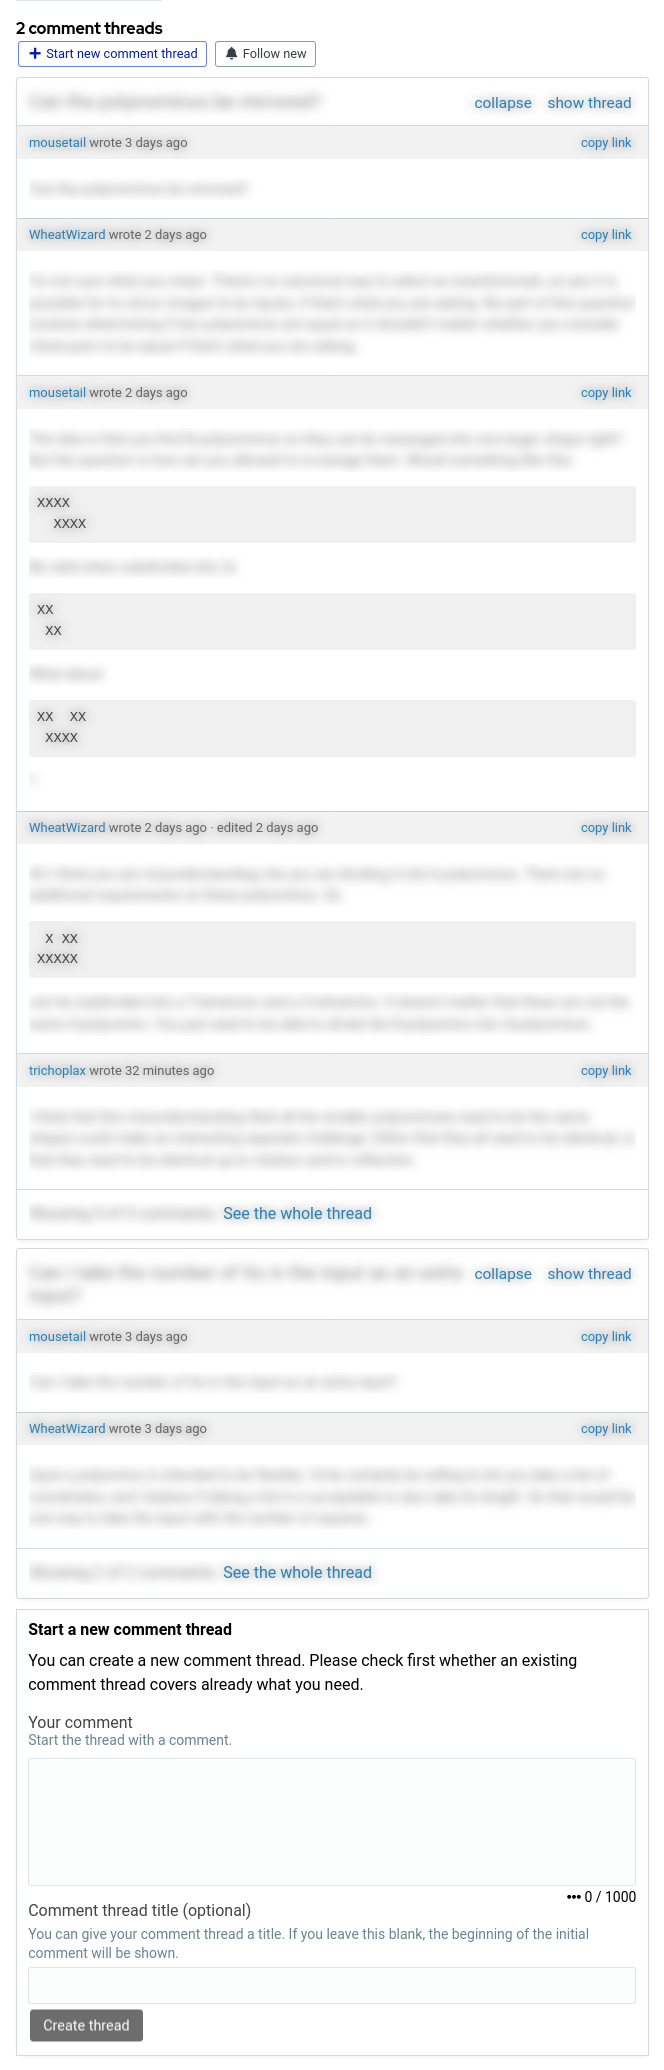 A tall blurred out comment thread separating the "Start new comment thread" button from the resulting input box